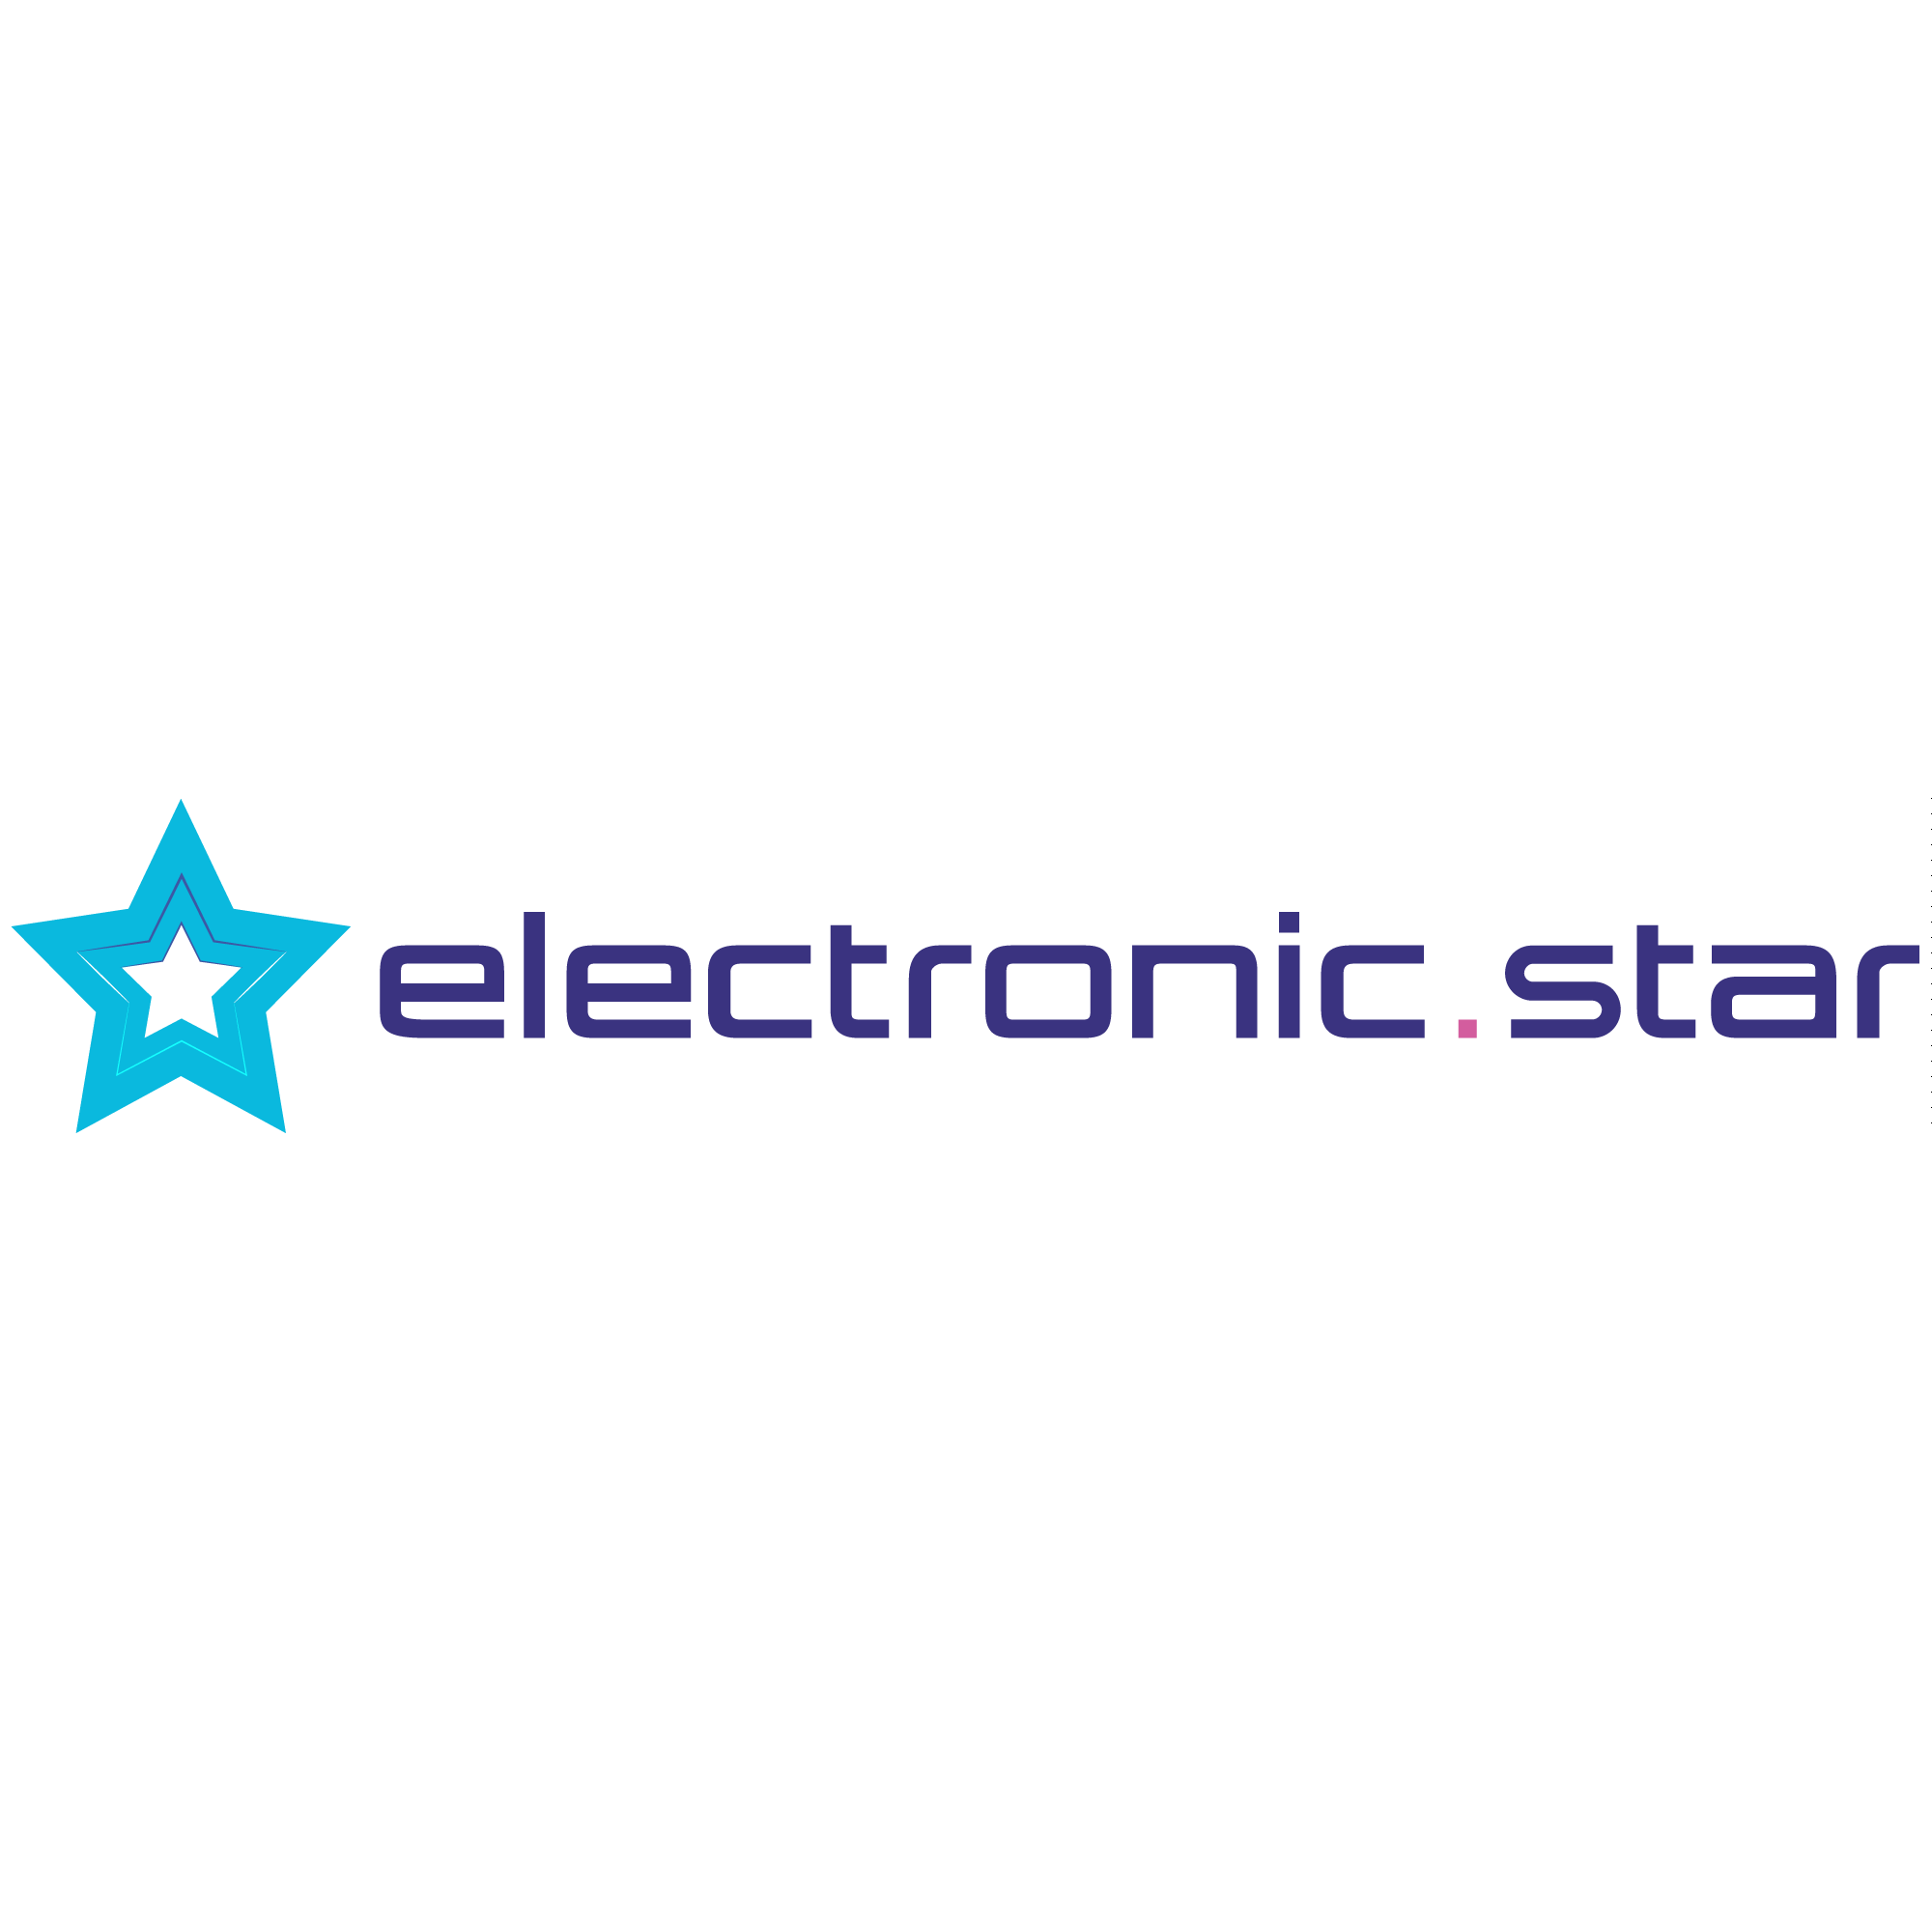 electronic star